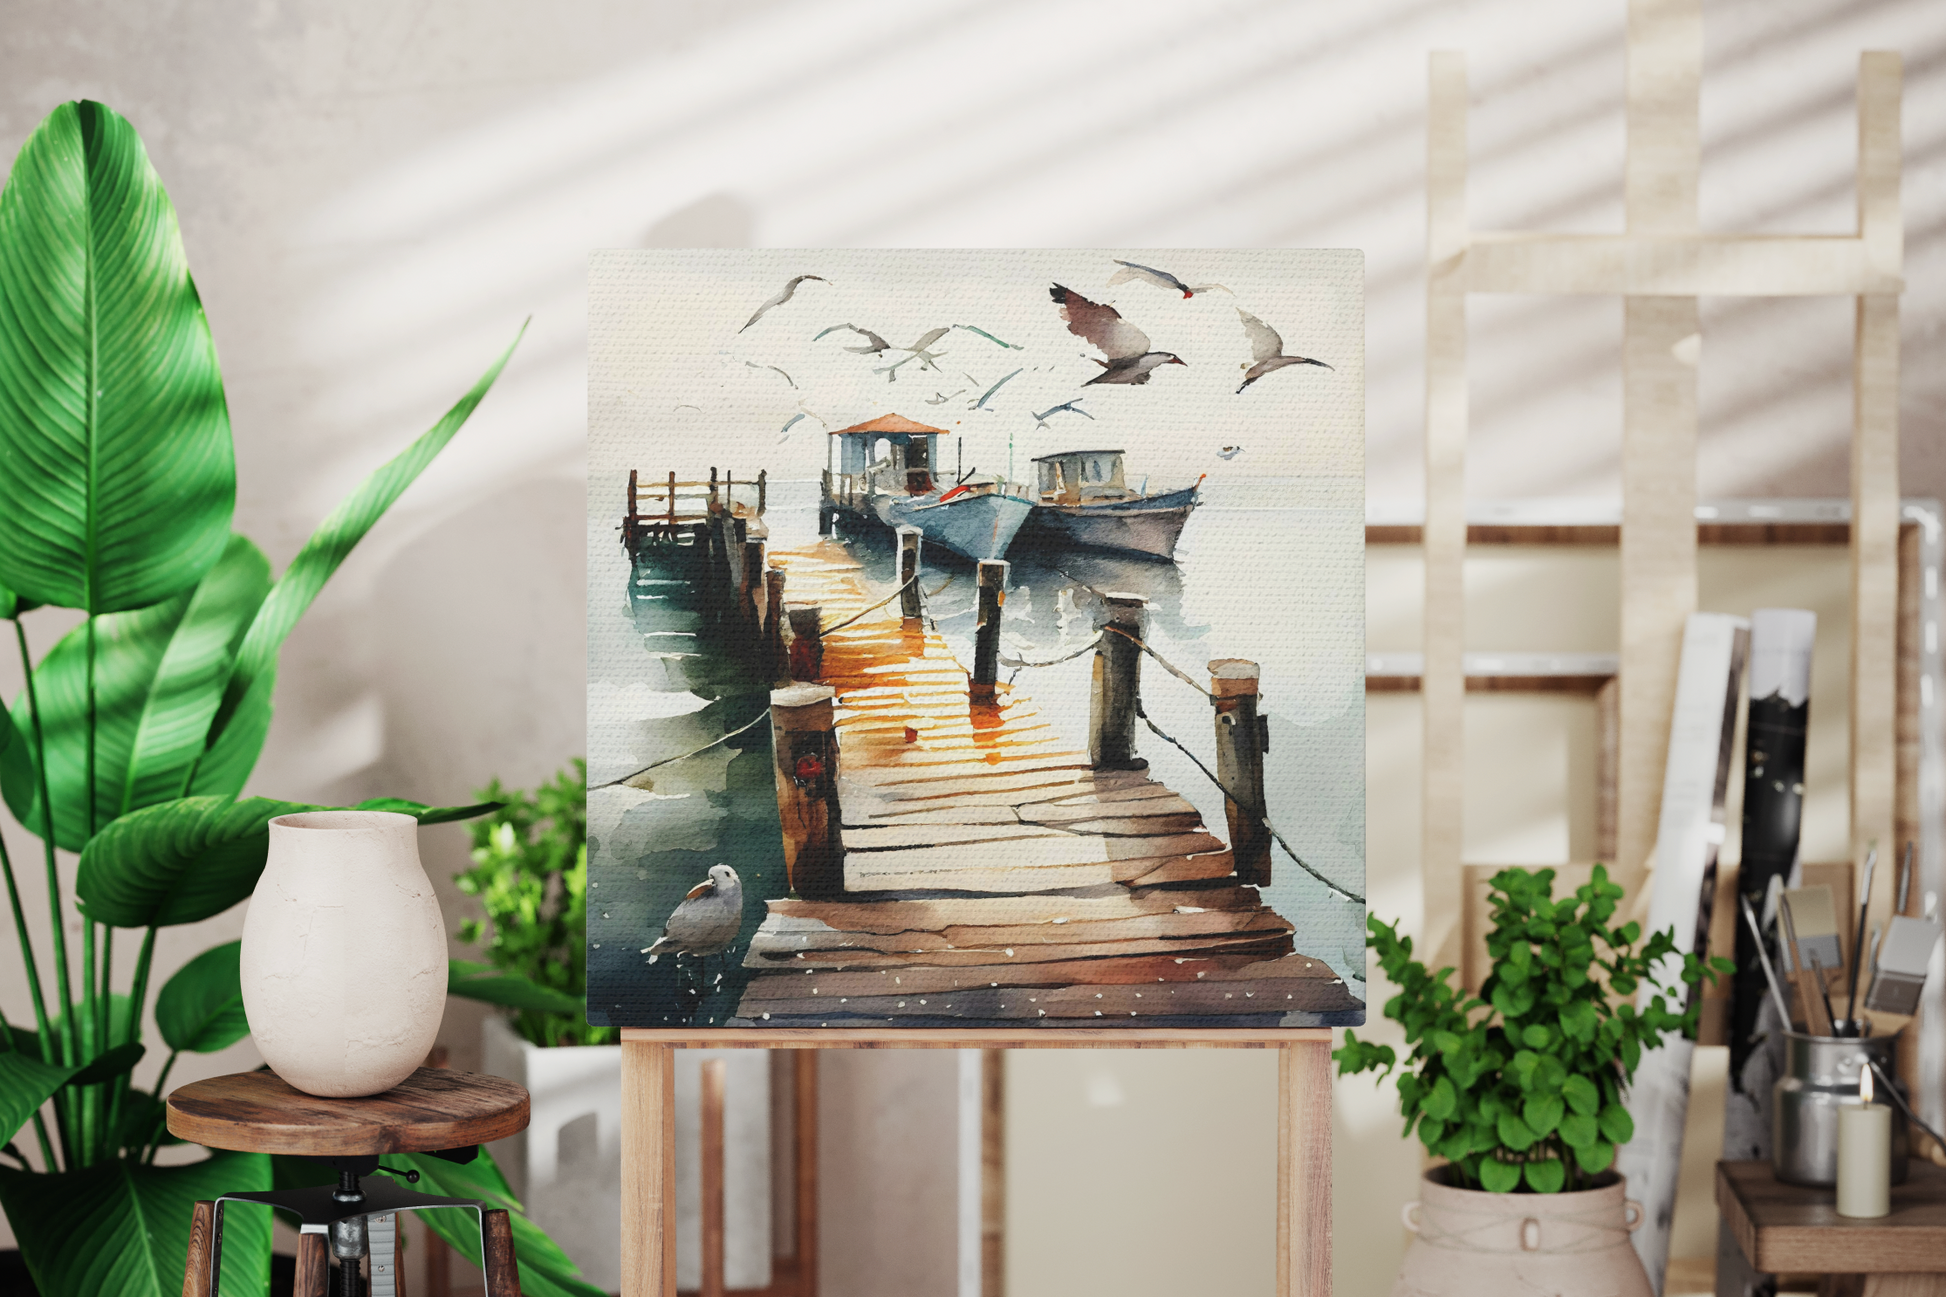 yacht canvas design in an ocean inspired room, nautical boat canvas with seagulls on it hanging on a wall, sailboat canvas in a nautical theme room